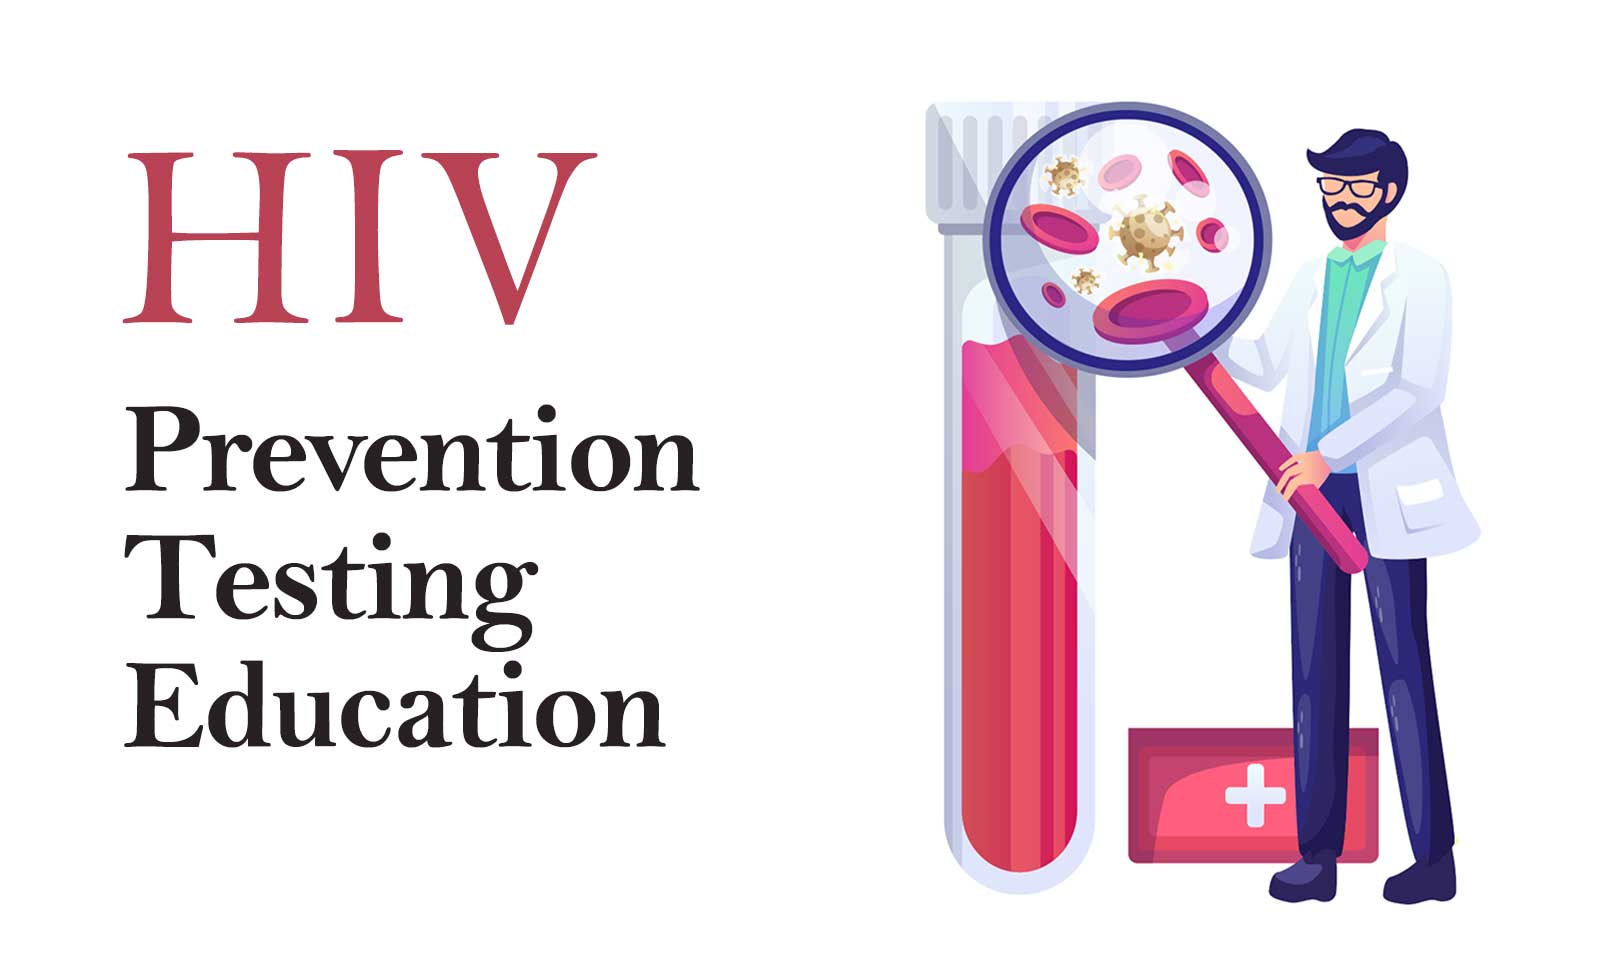 HIV Prevention and Testing picture